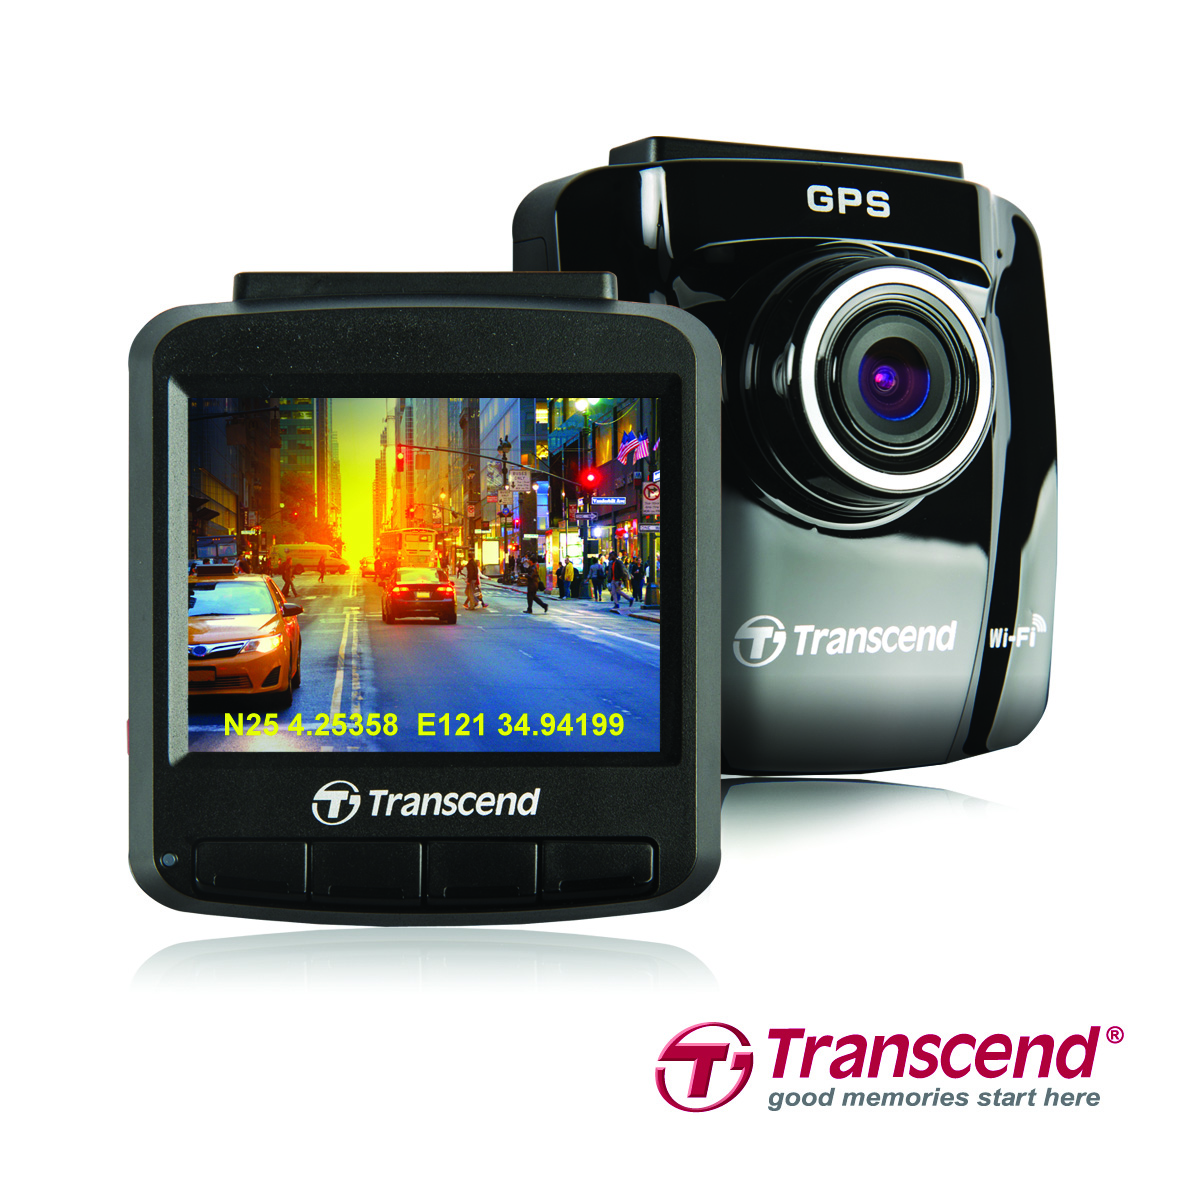 Transcend Releases DrivePro 220 Car Video Recorder with Built-in ...